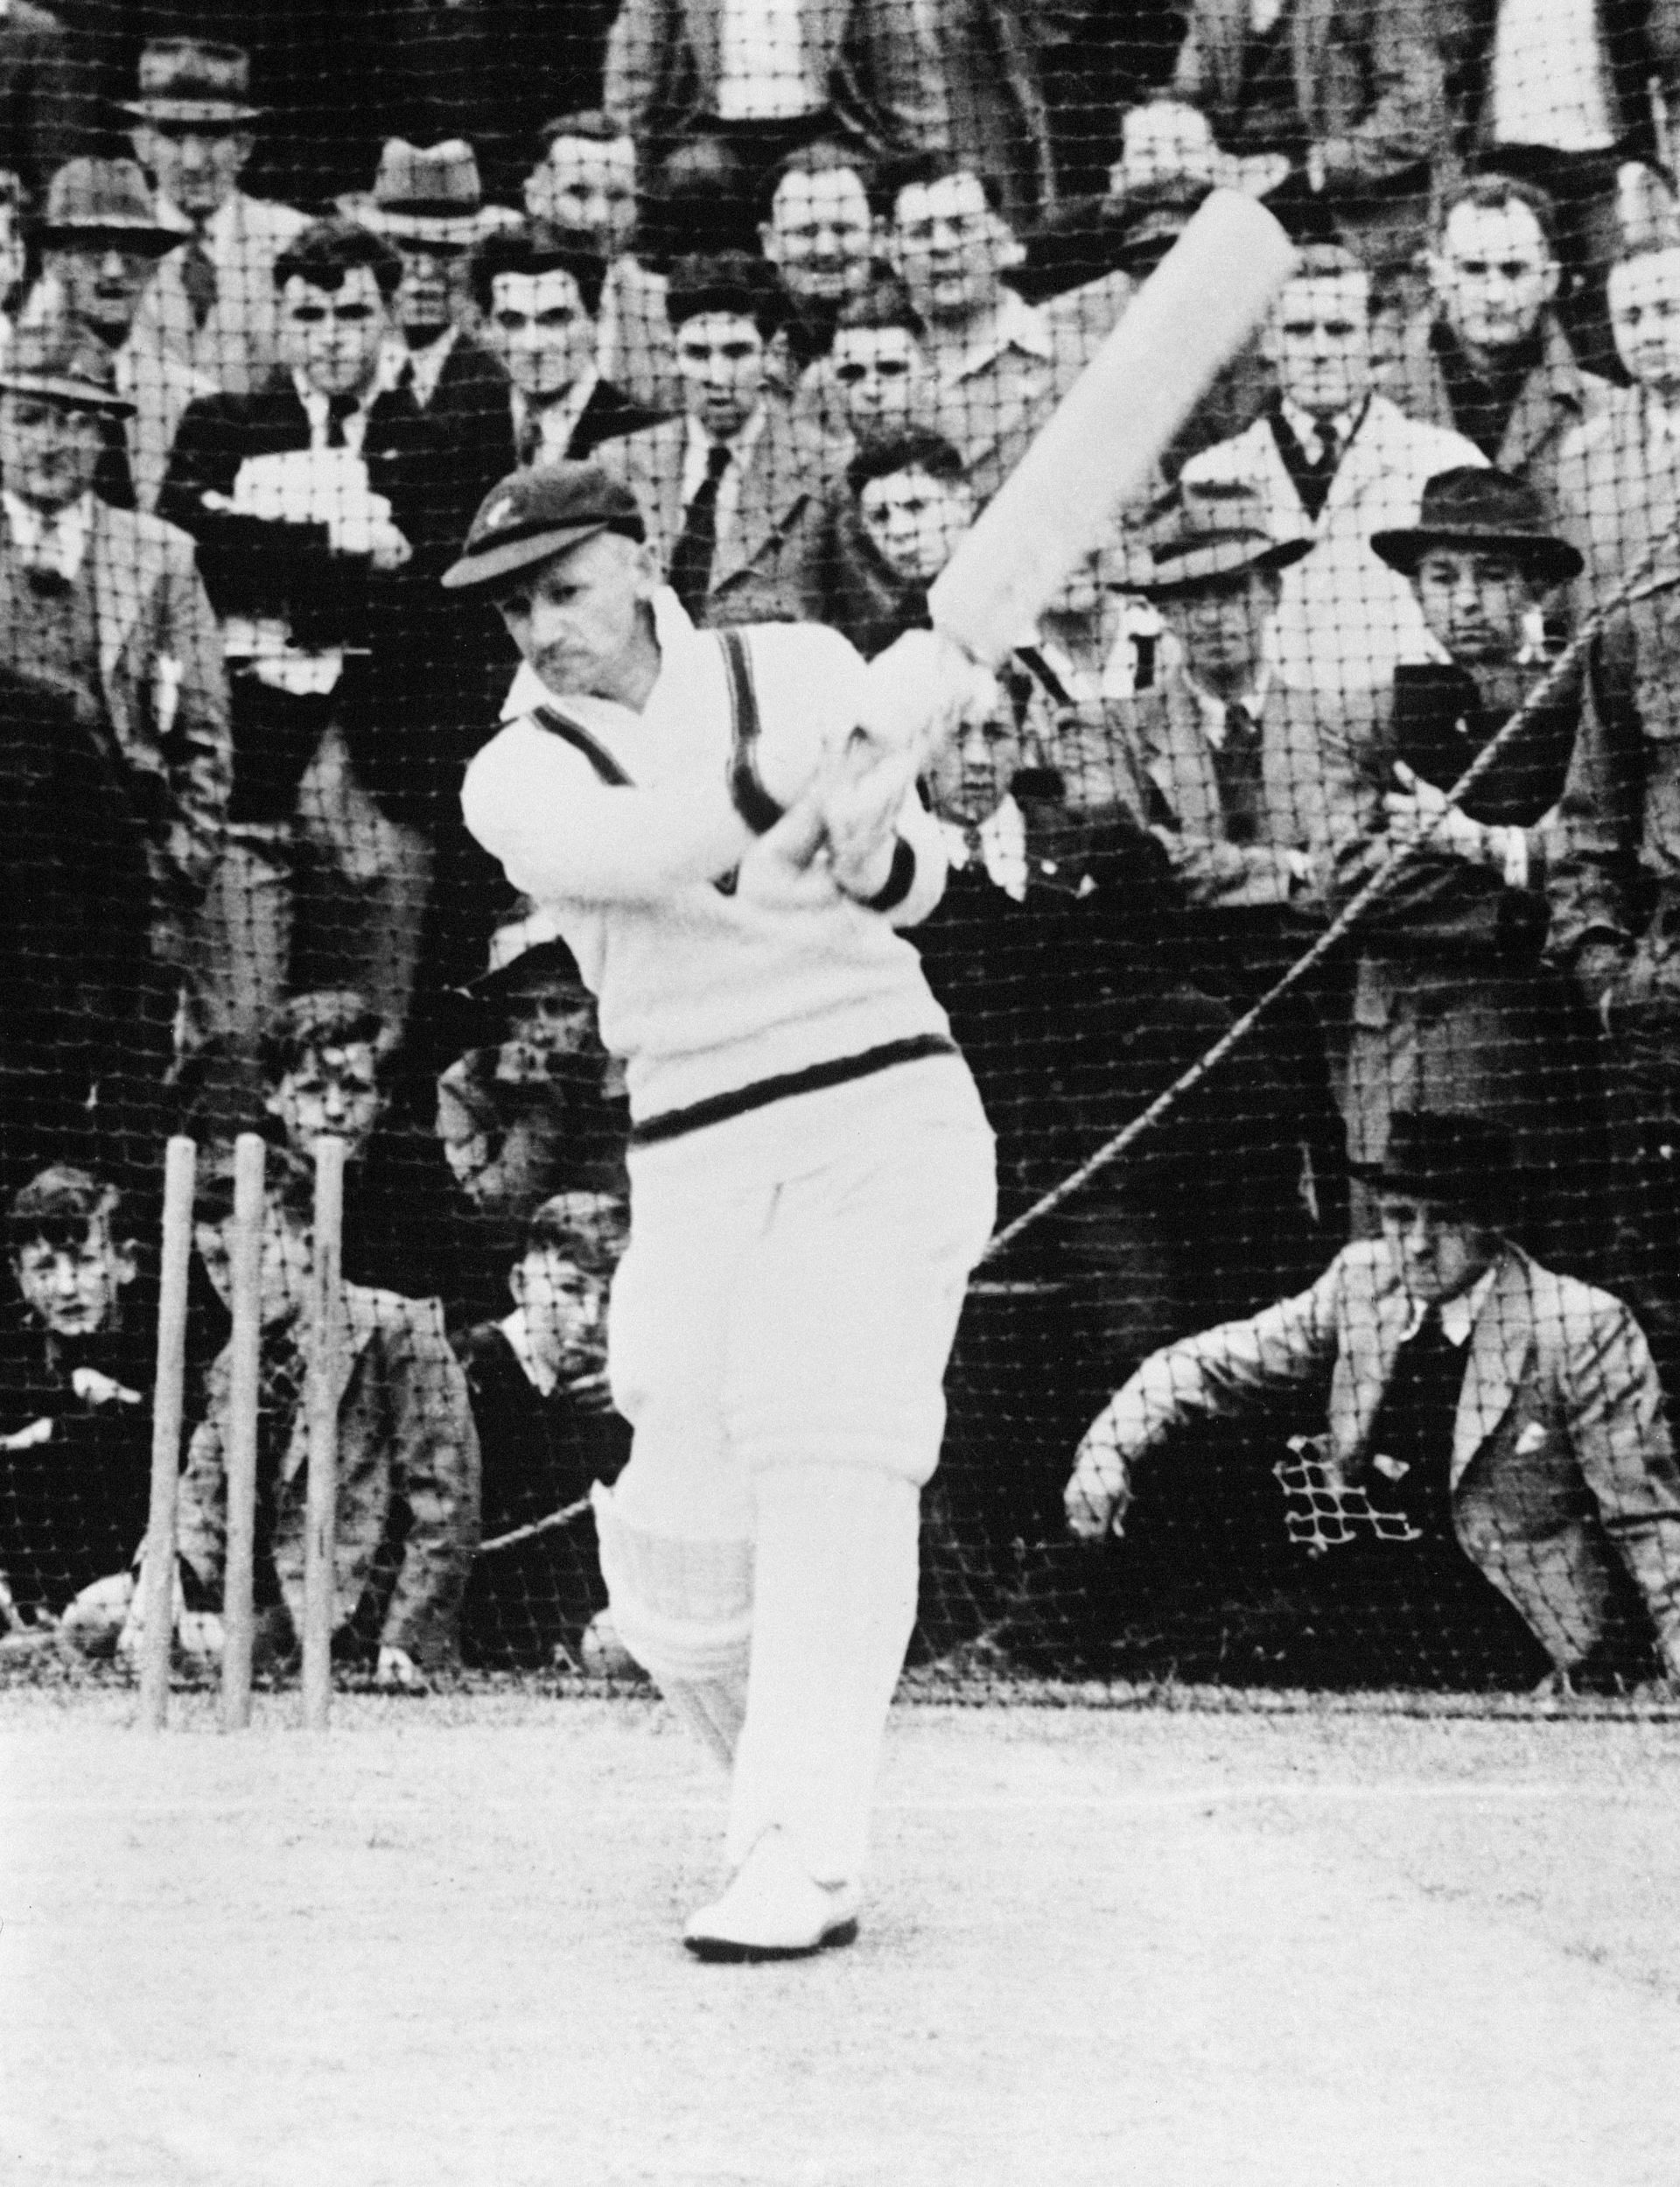 Don Bradman&rsquo;s superb batting diverted the minds of the people during the dark days of the Great Depression